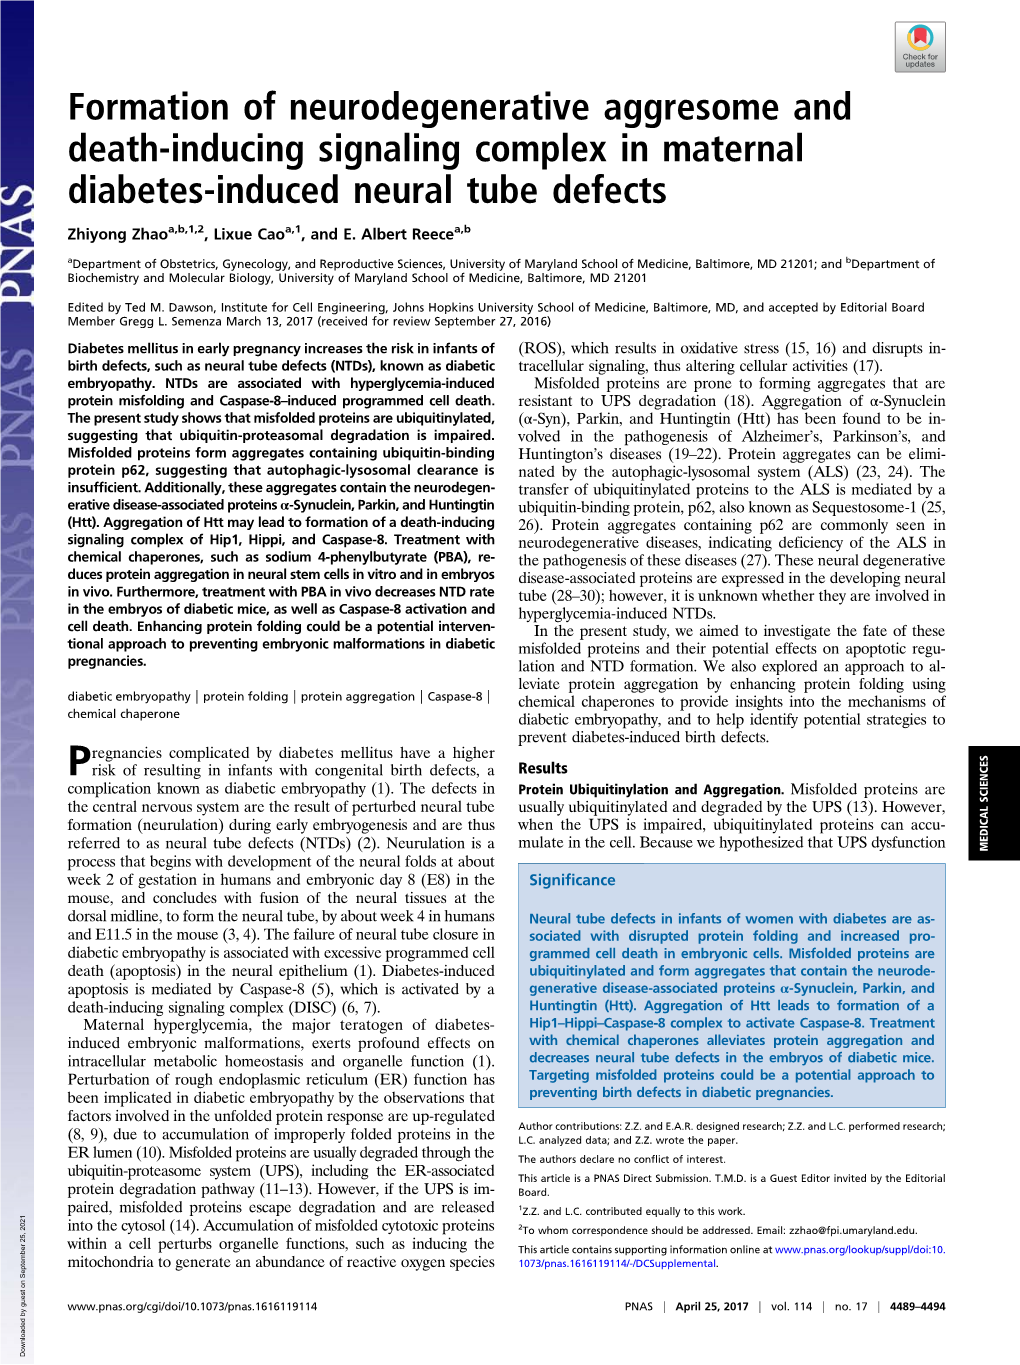 Formation of Neurodegenerative Aggresome and Death-Inducing Signaling Complex in Maternal Diabetes-Induced Neural Tube Defects